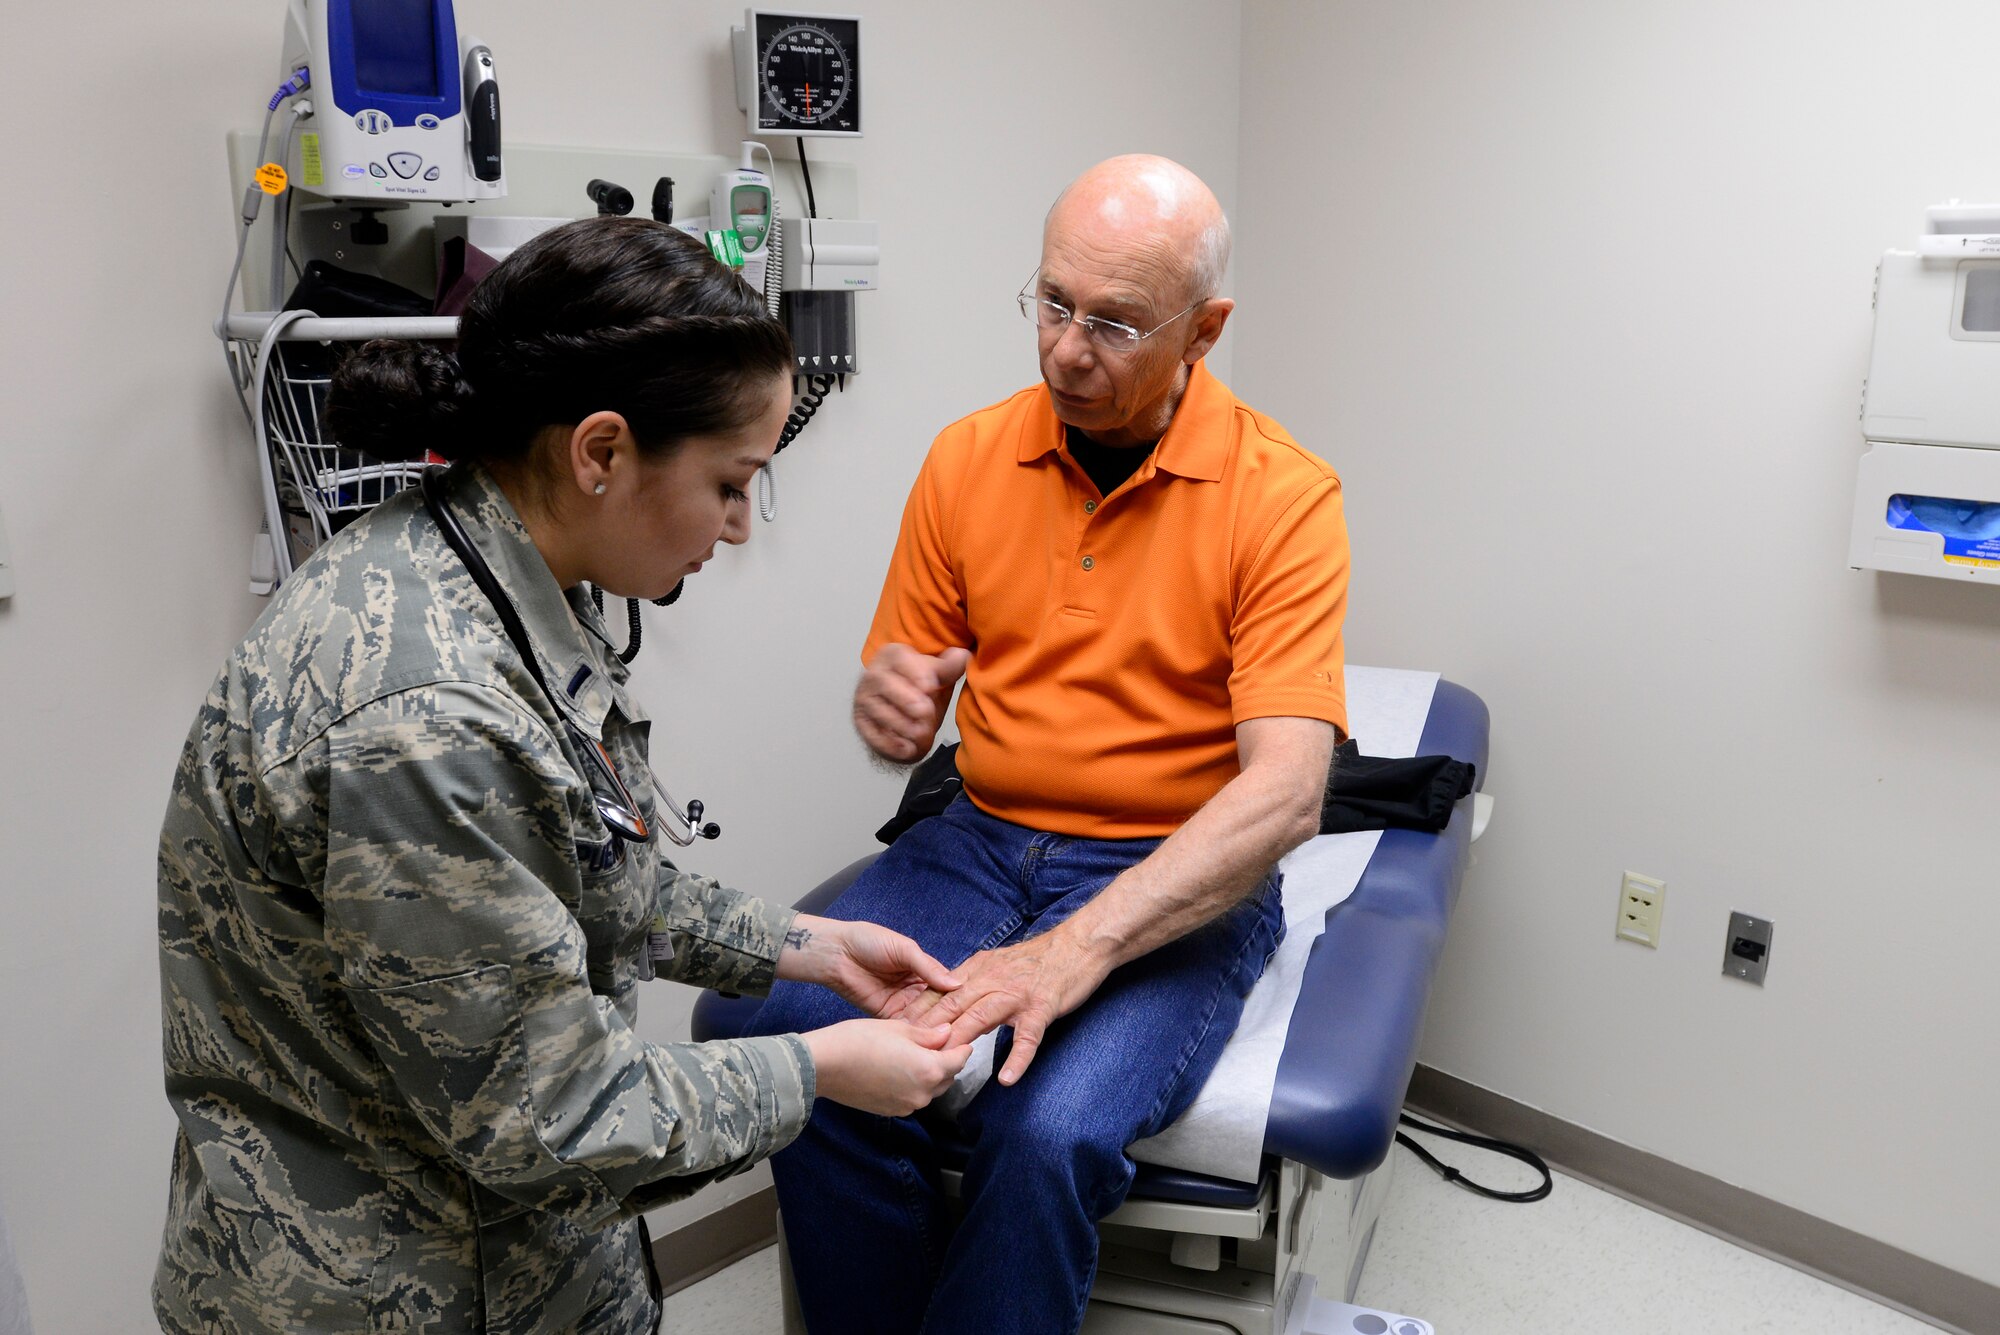 1st Lt. Marina Puentes 22nd Medical Operations Squadron Physician Assistant, checks a patient’s hand, April 22, 2015, at McConnell Air Force Base, Kan. Puentes is one of three PAs at Team McConnell and is part of a team who serves more than 11,000 beneficiaries across Team McConnell. (U.S. Air Force photo by Senior Airman Trevor Rhynes)